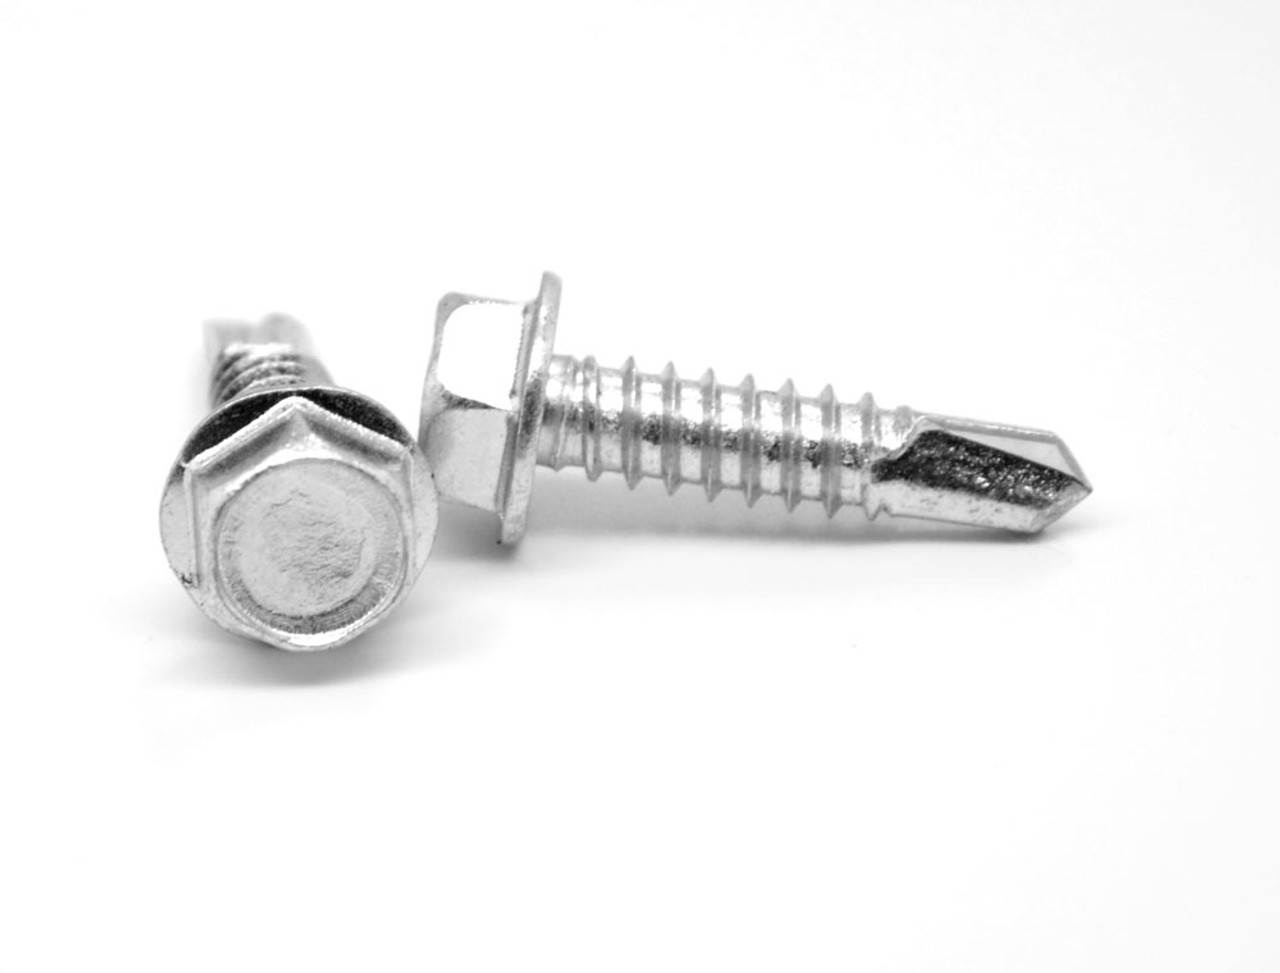 #10-24 x 1/2" (FT) Coarse Thread Self Drilling Screw Hex Washer Head #2 Point Stainless Steel 18-8